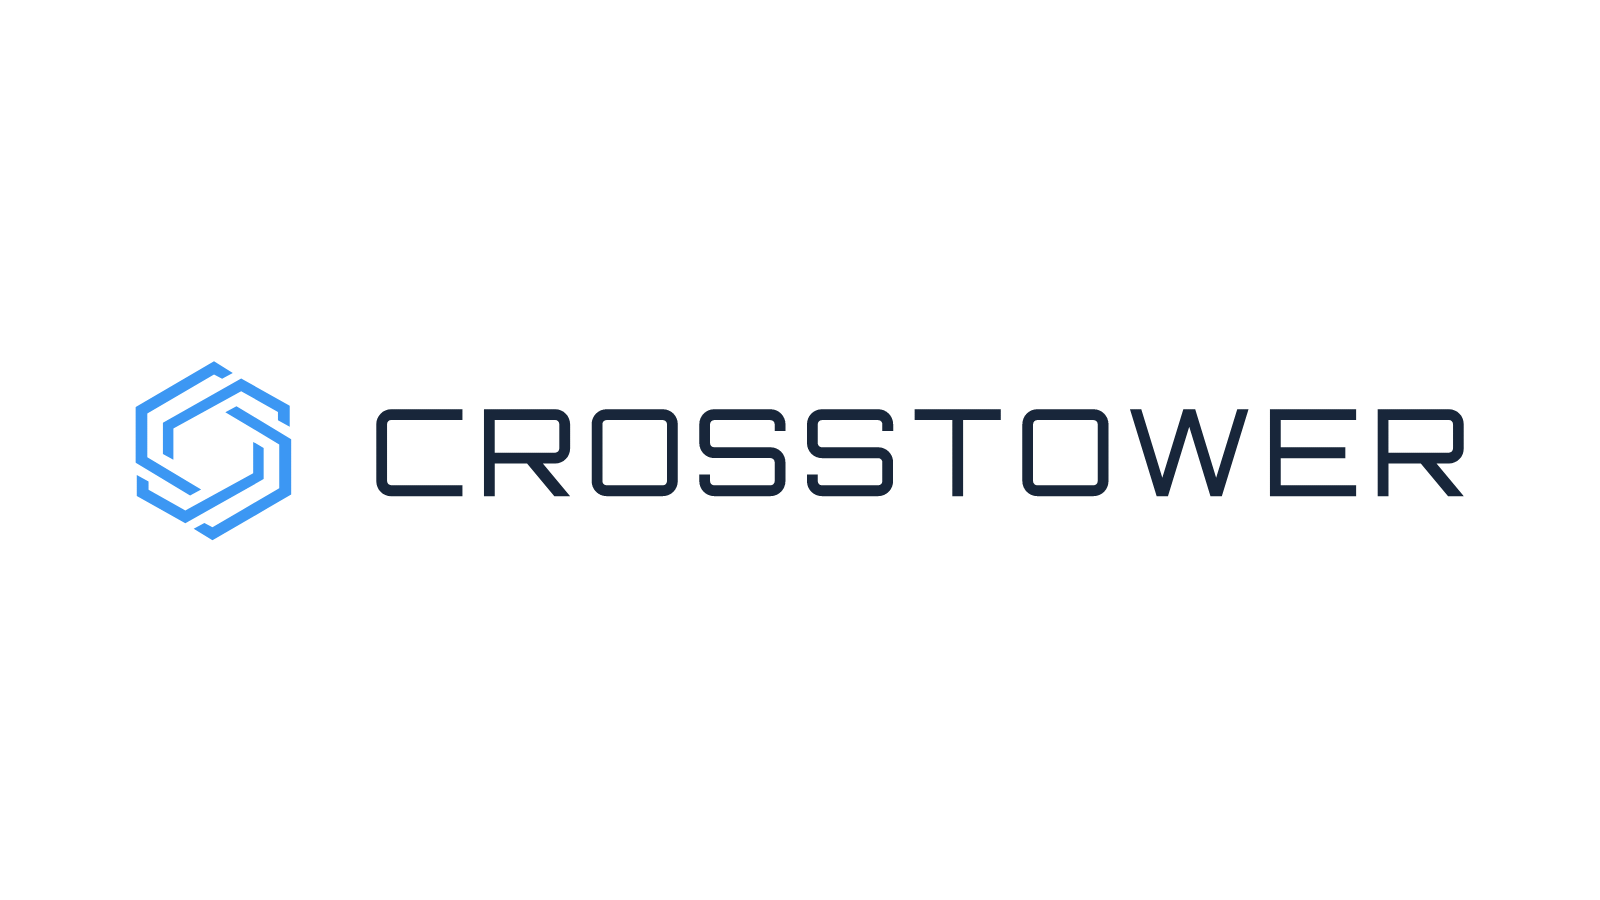 CrossTower Launches Global NFT Marketplace, Offers Rare Music, Art, Movie, Sports Collectibles